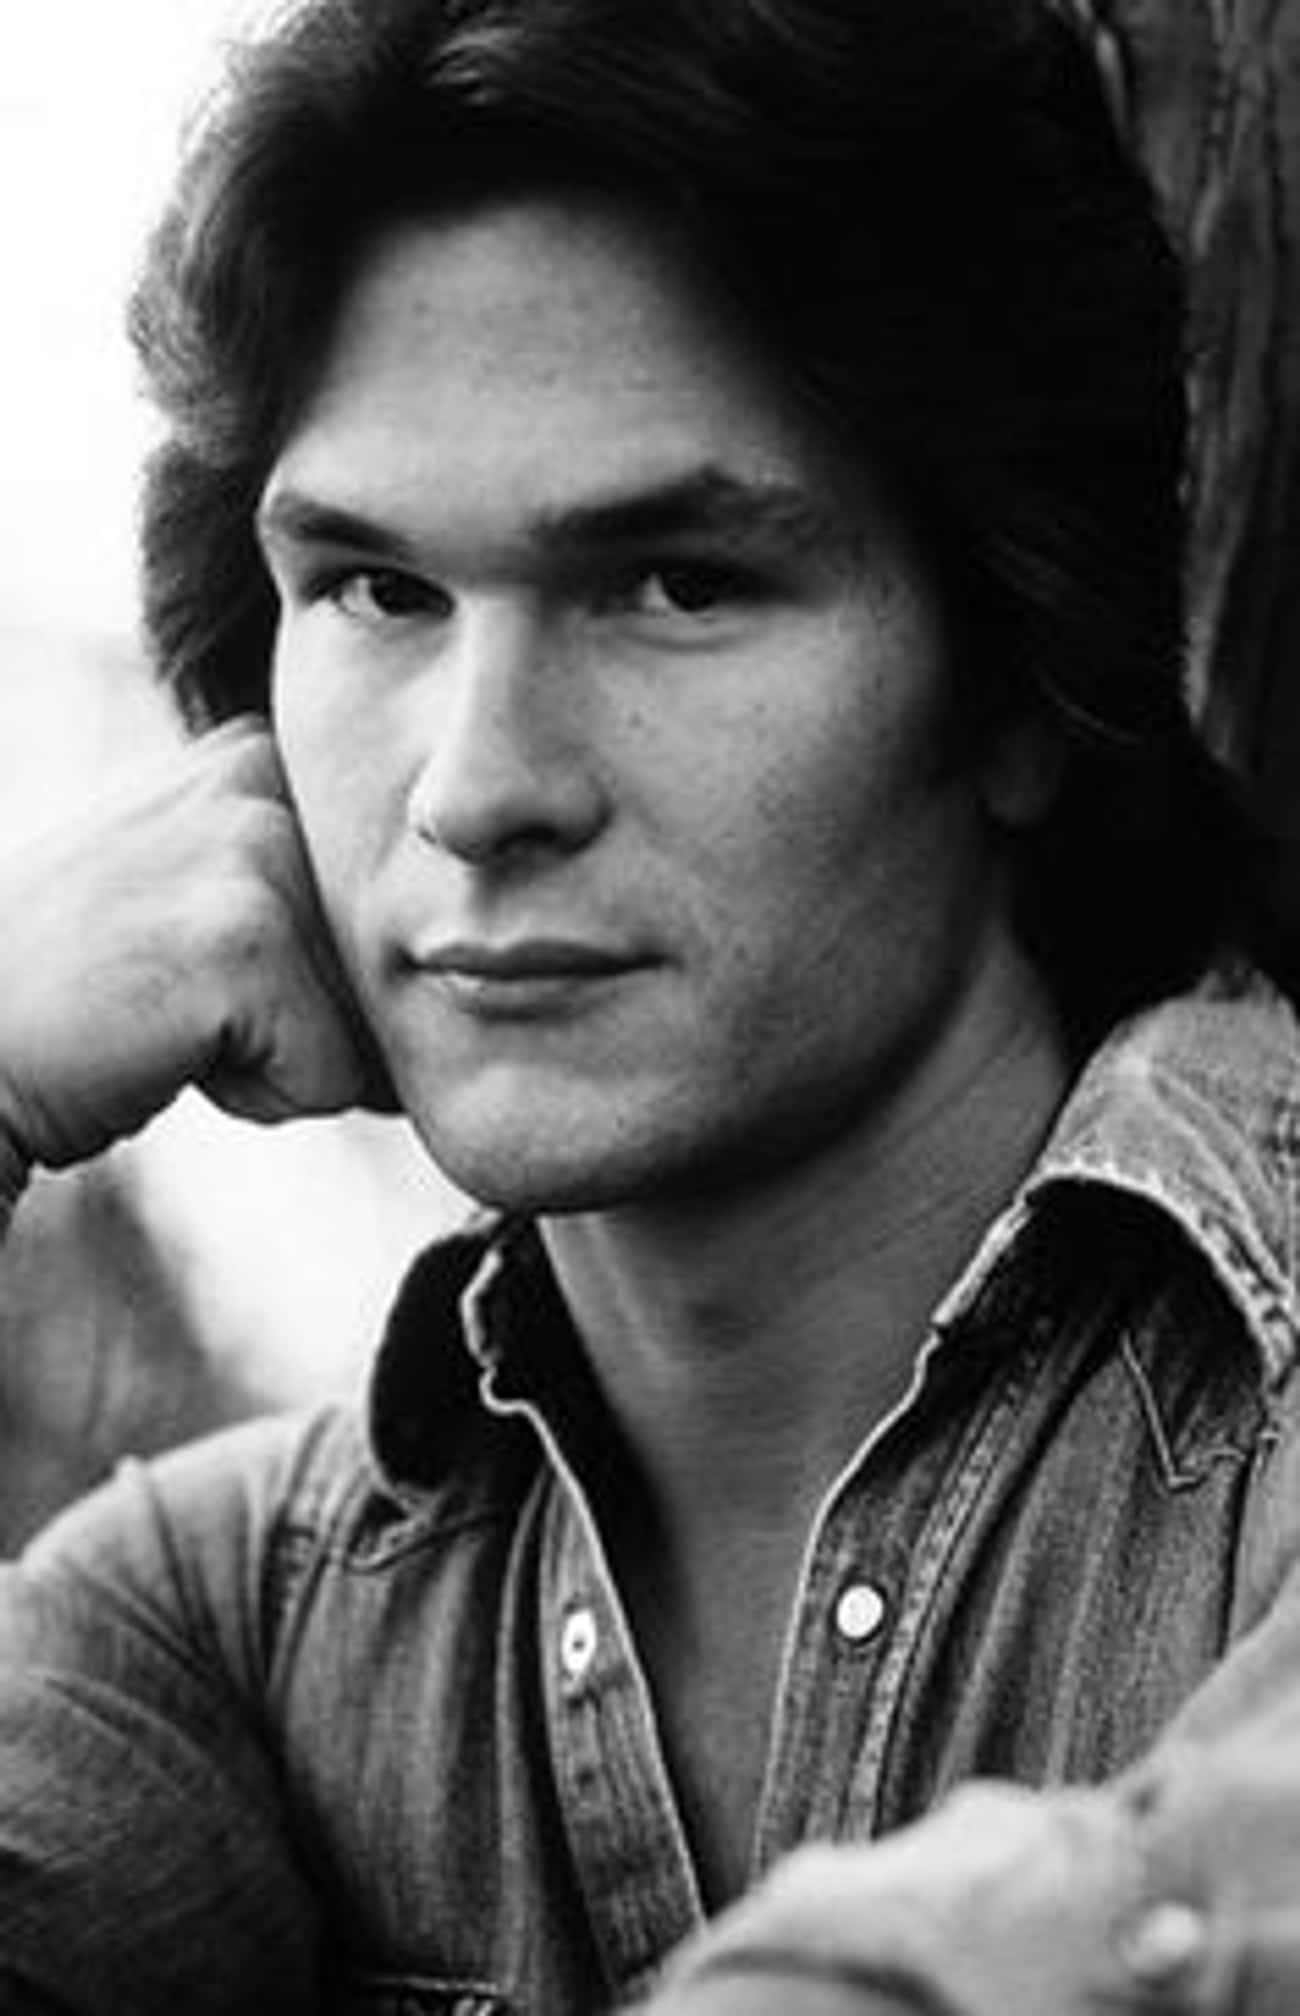 Young Patrick Swayze in Blue Jean Buttondown